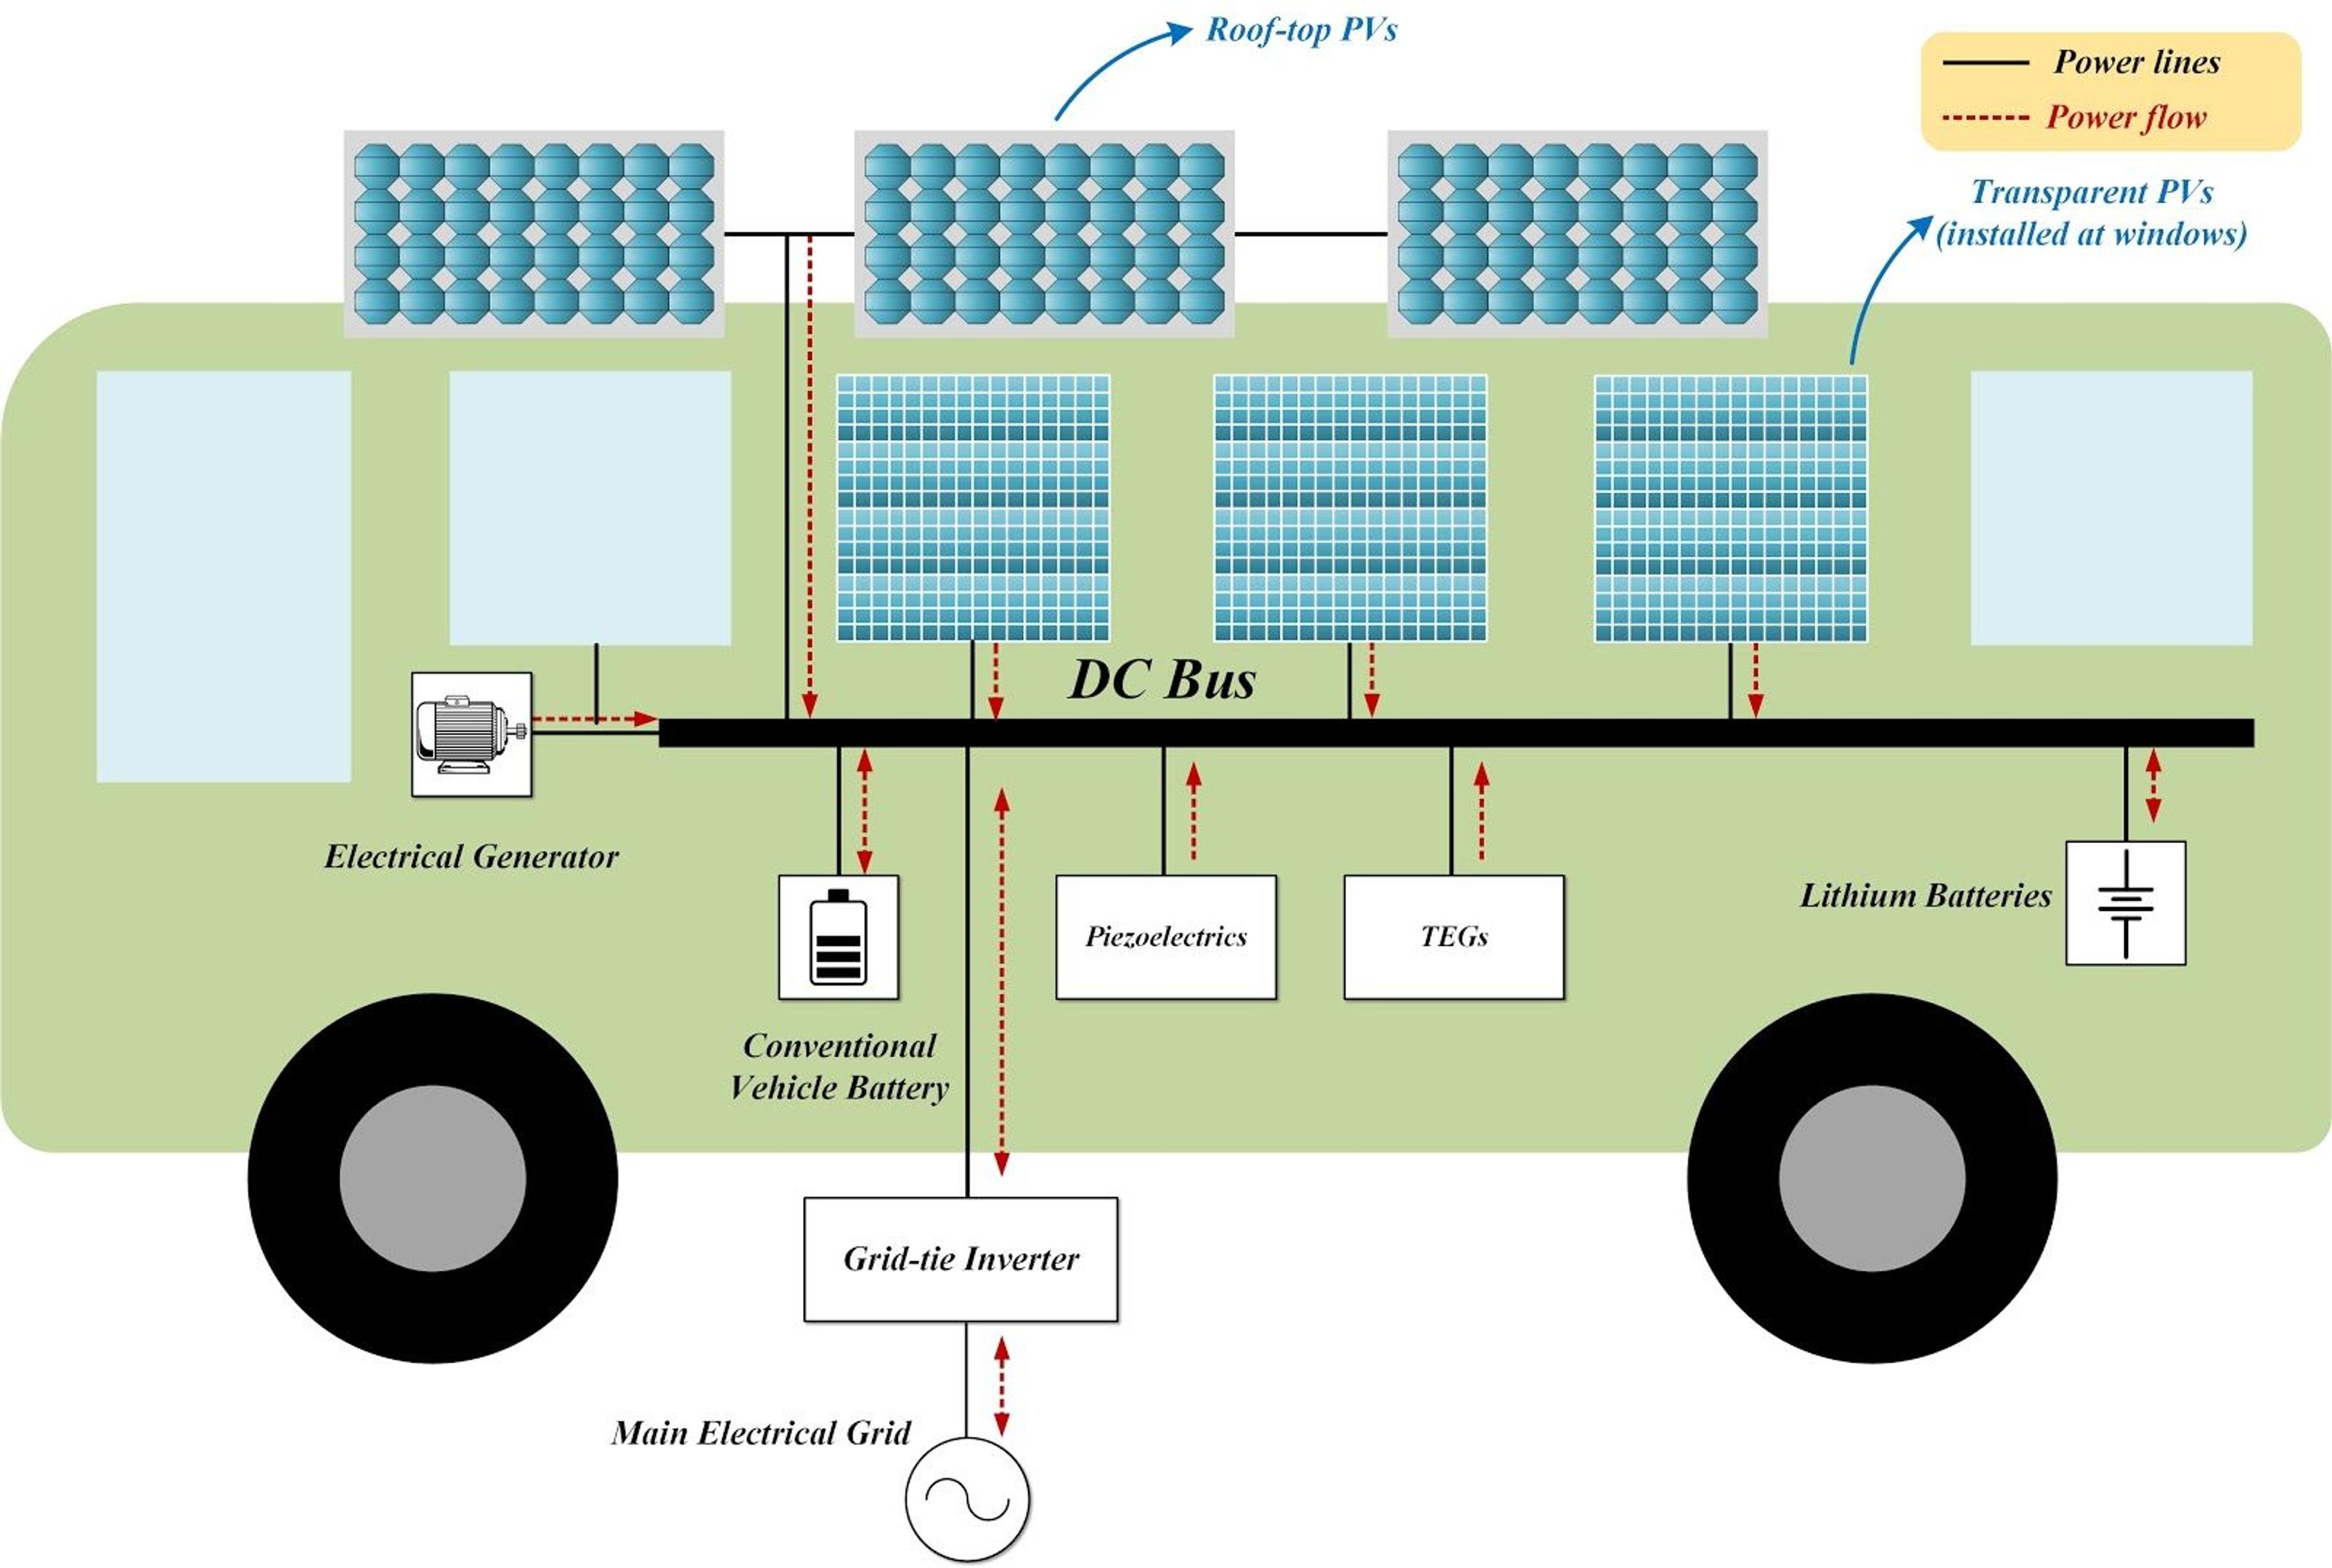 Illustration of the bus